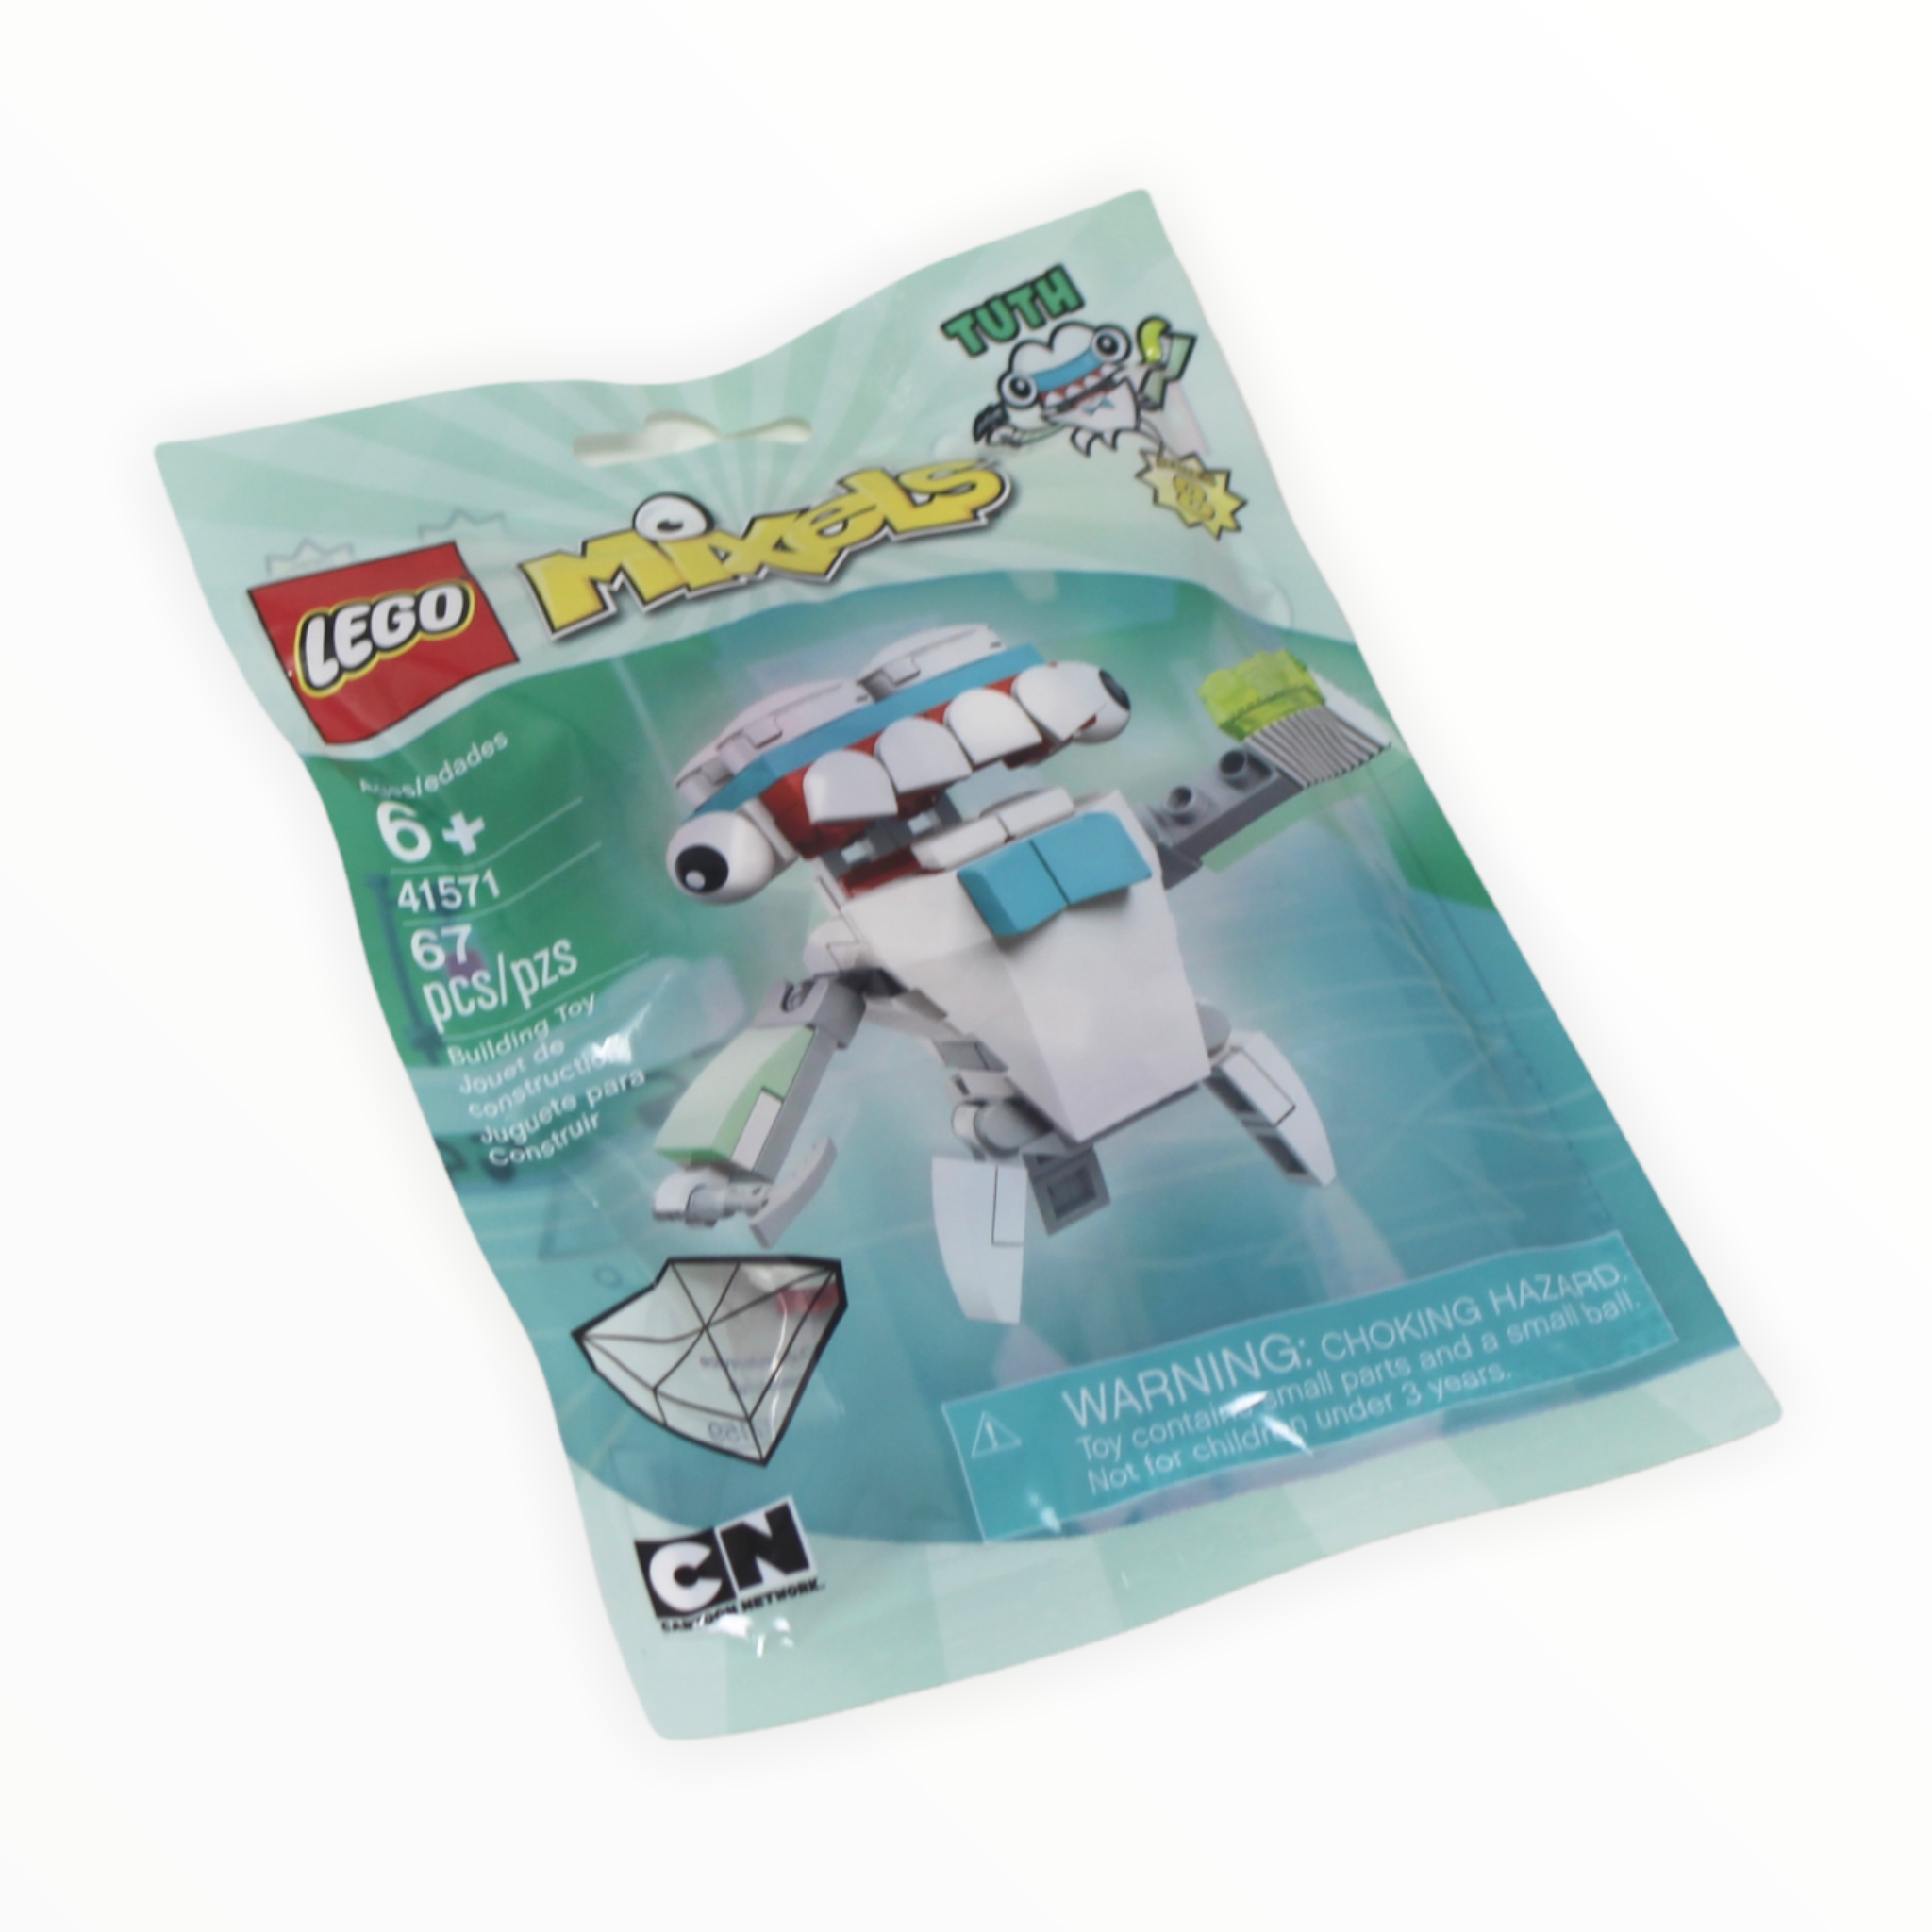 Polybag 41571 Mixels Tuth